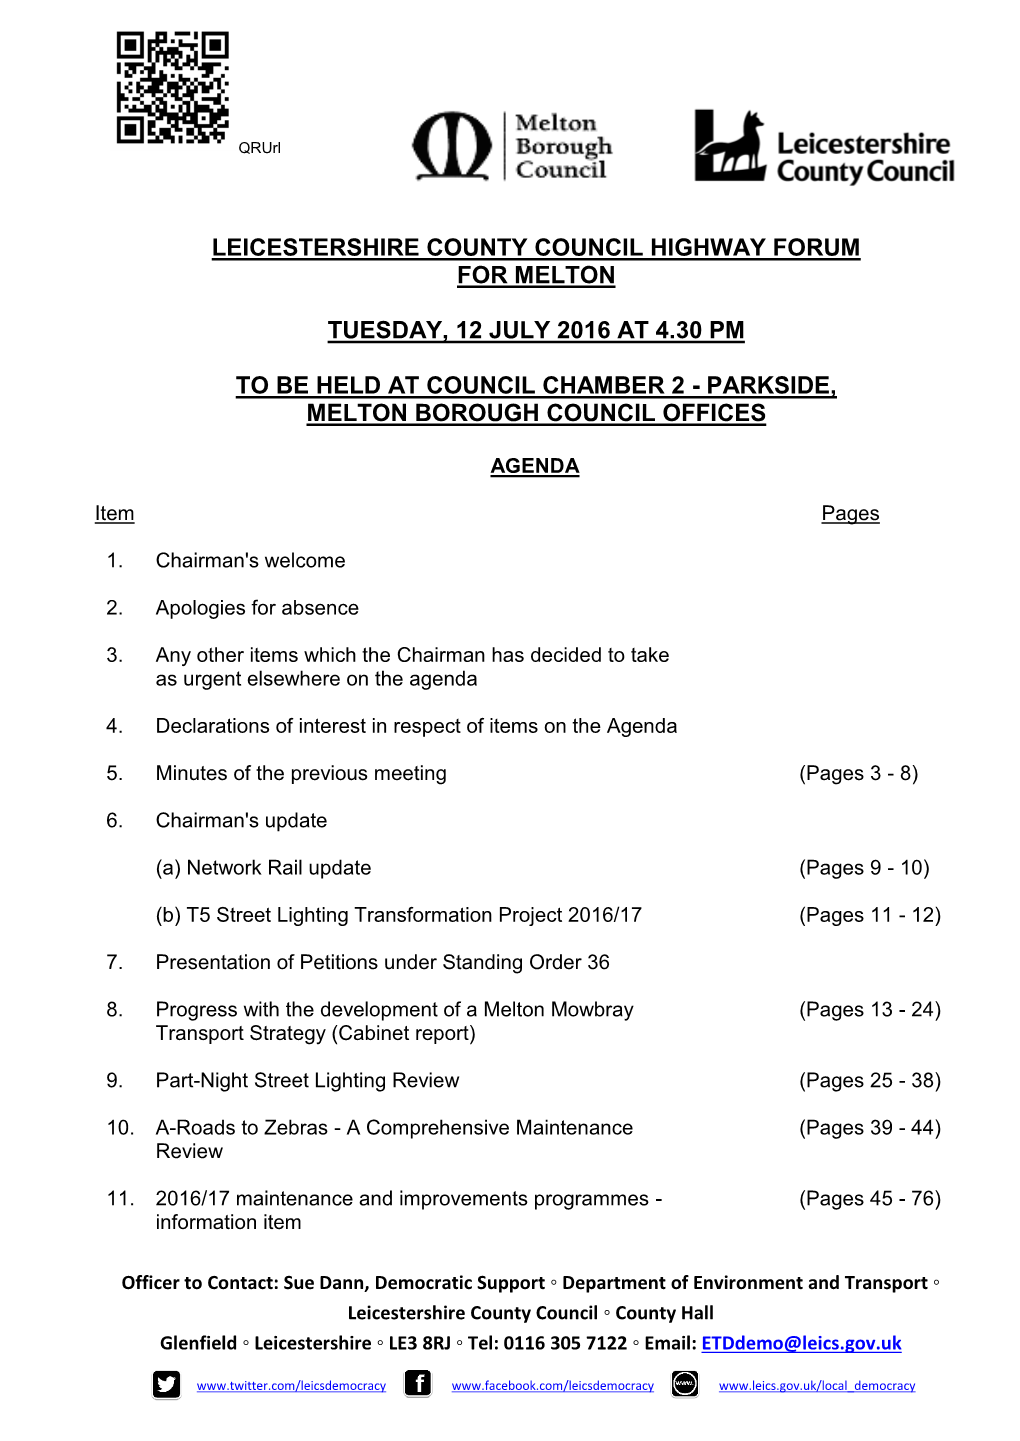 (Public Pack)Agenda Document for Leicestershire County Council Highway Forum for Melton, 12/07/2016 16:30